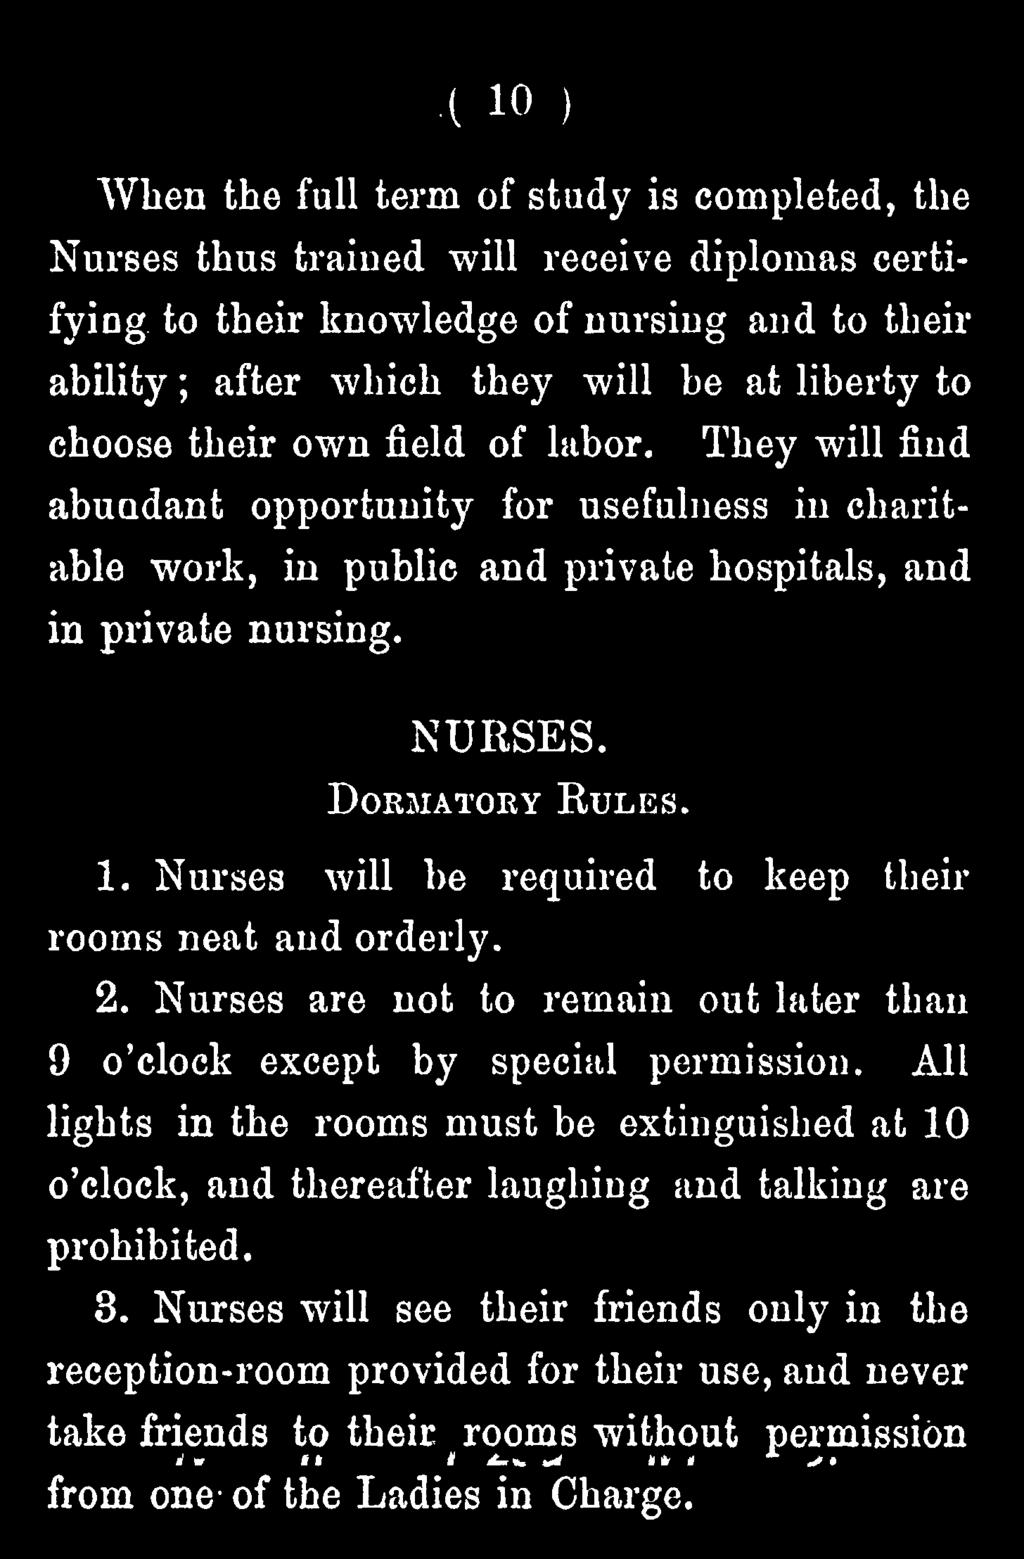 Nurses are not to remain out later than 9 o'clock except by special permission.